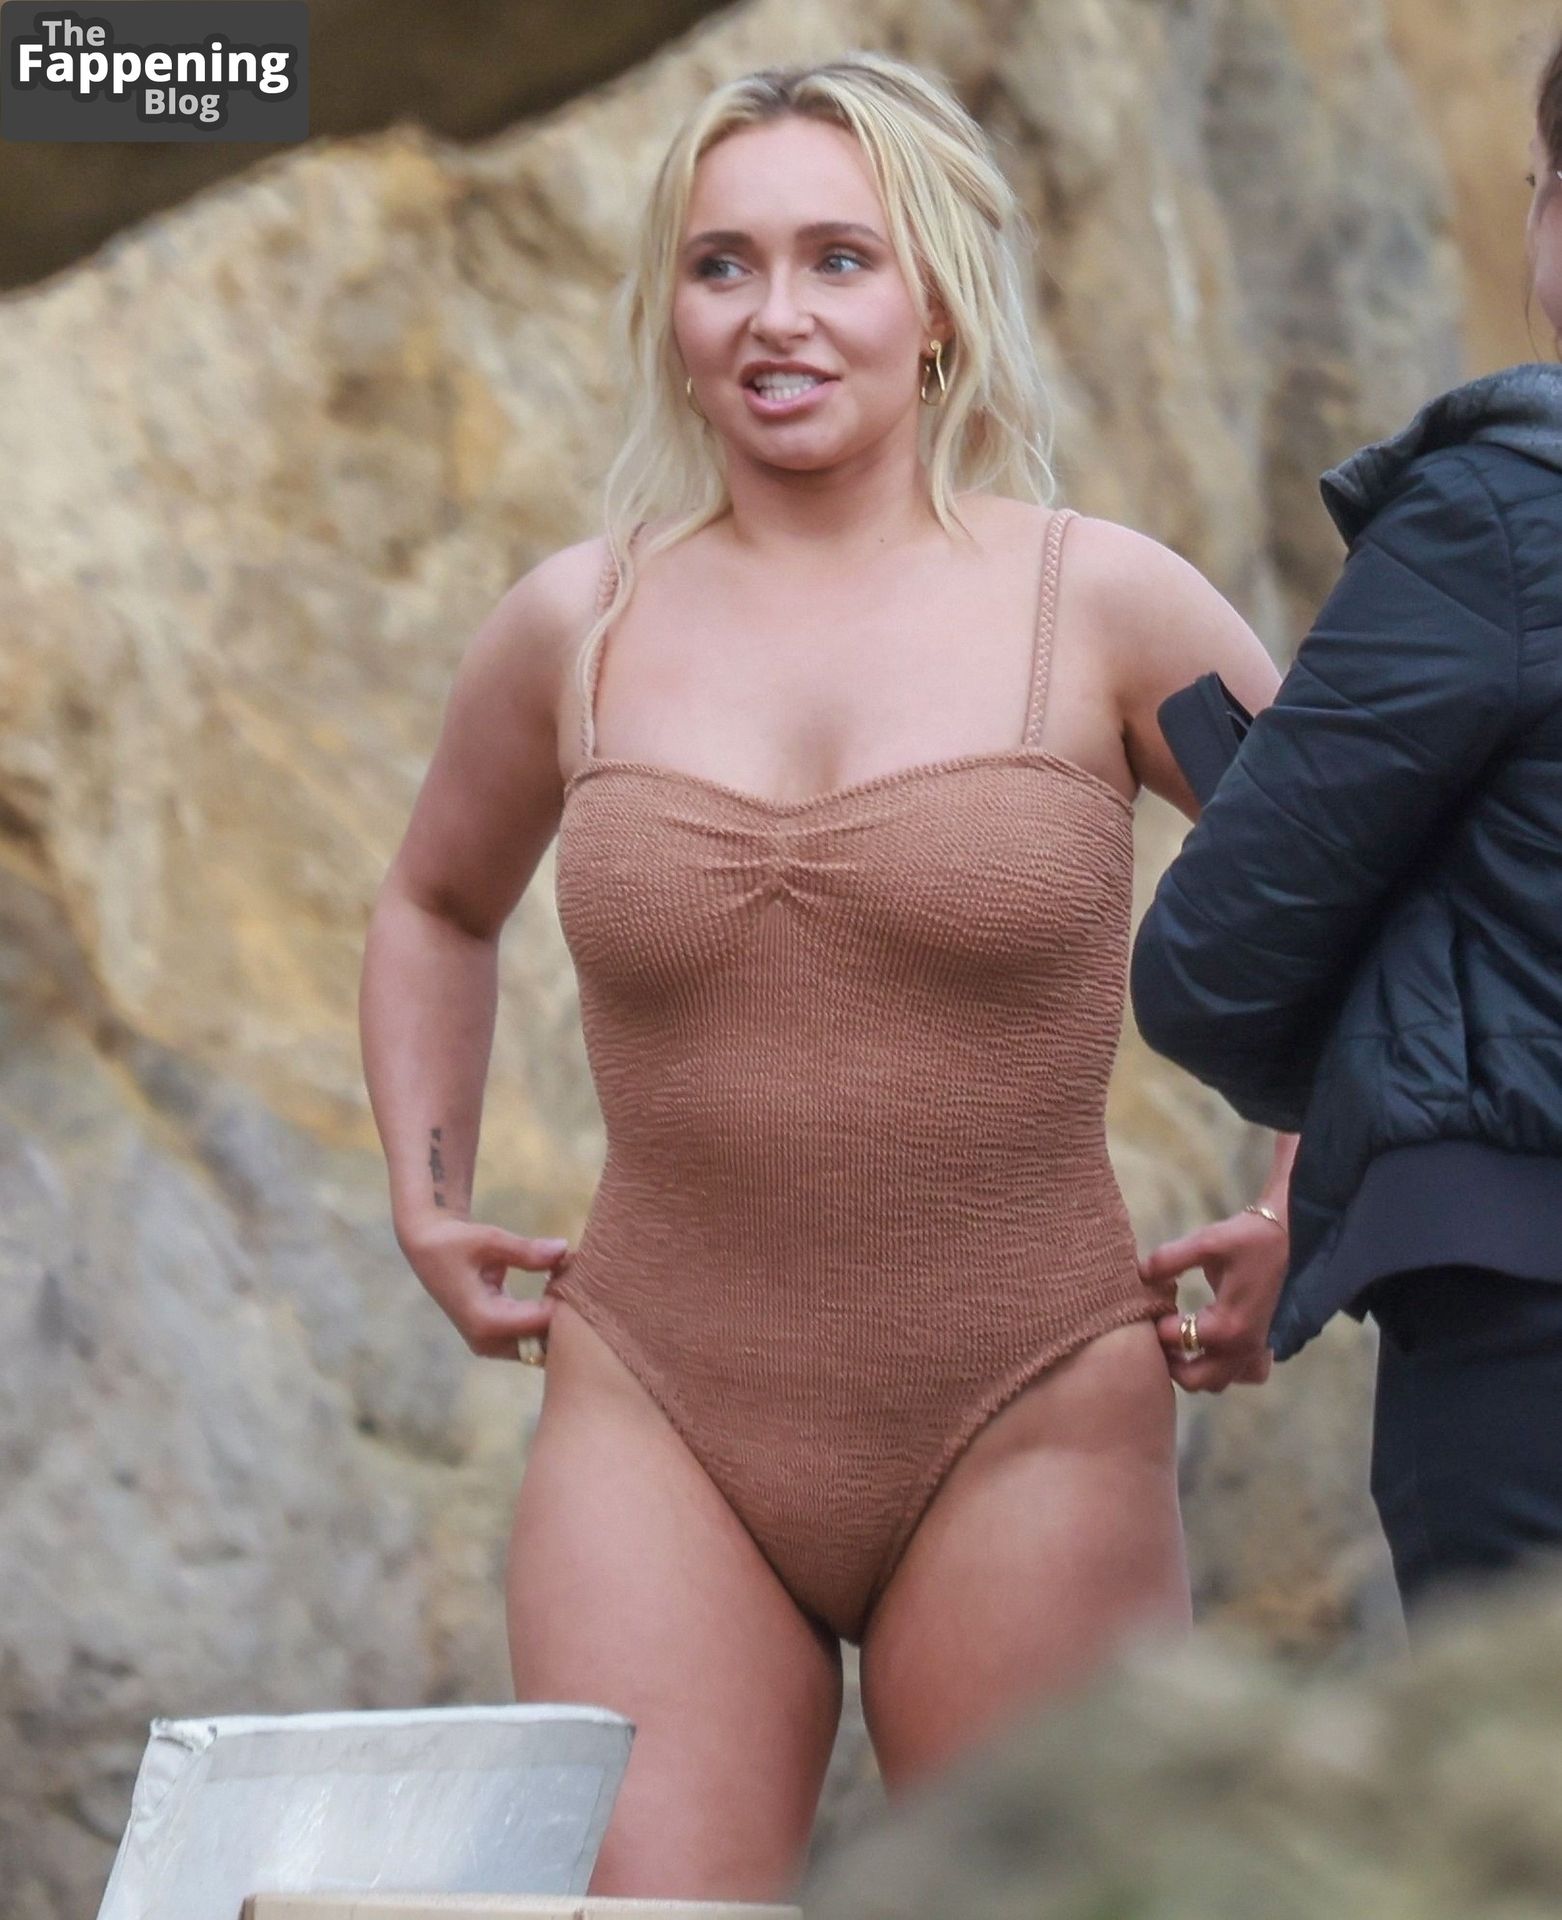 hayden-panettiere-private-photo-38680-thefappeningblog.com_.jpg